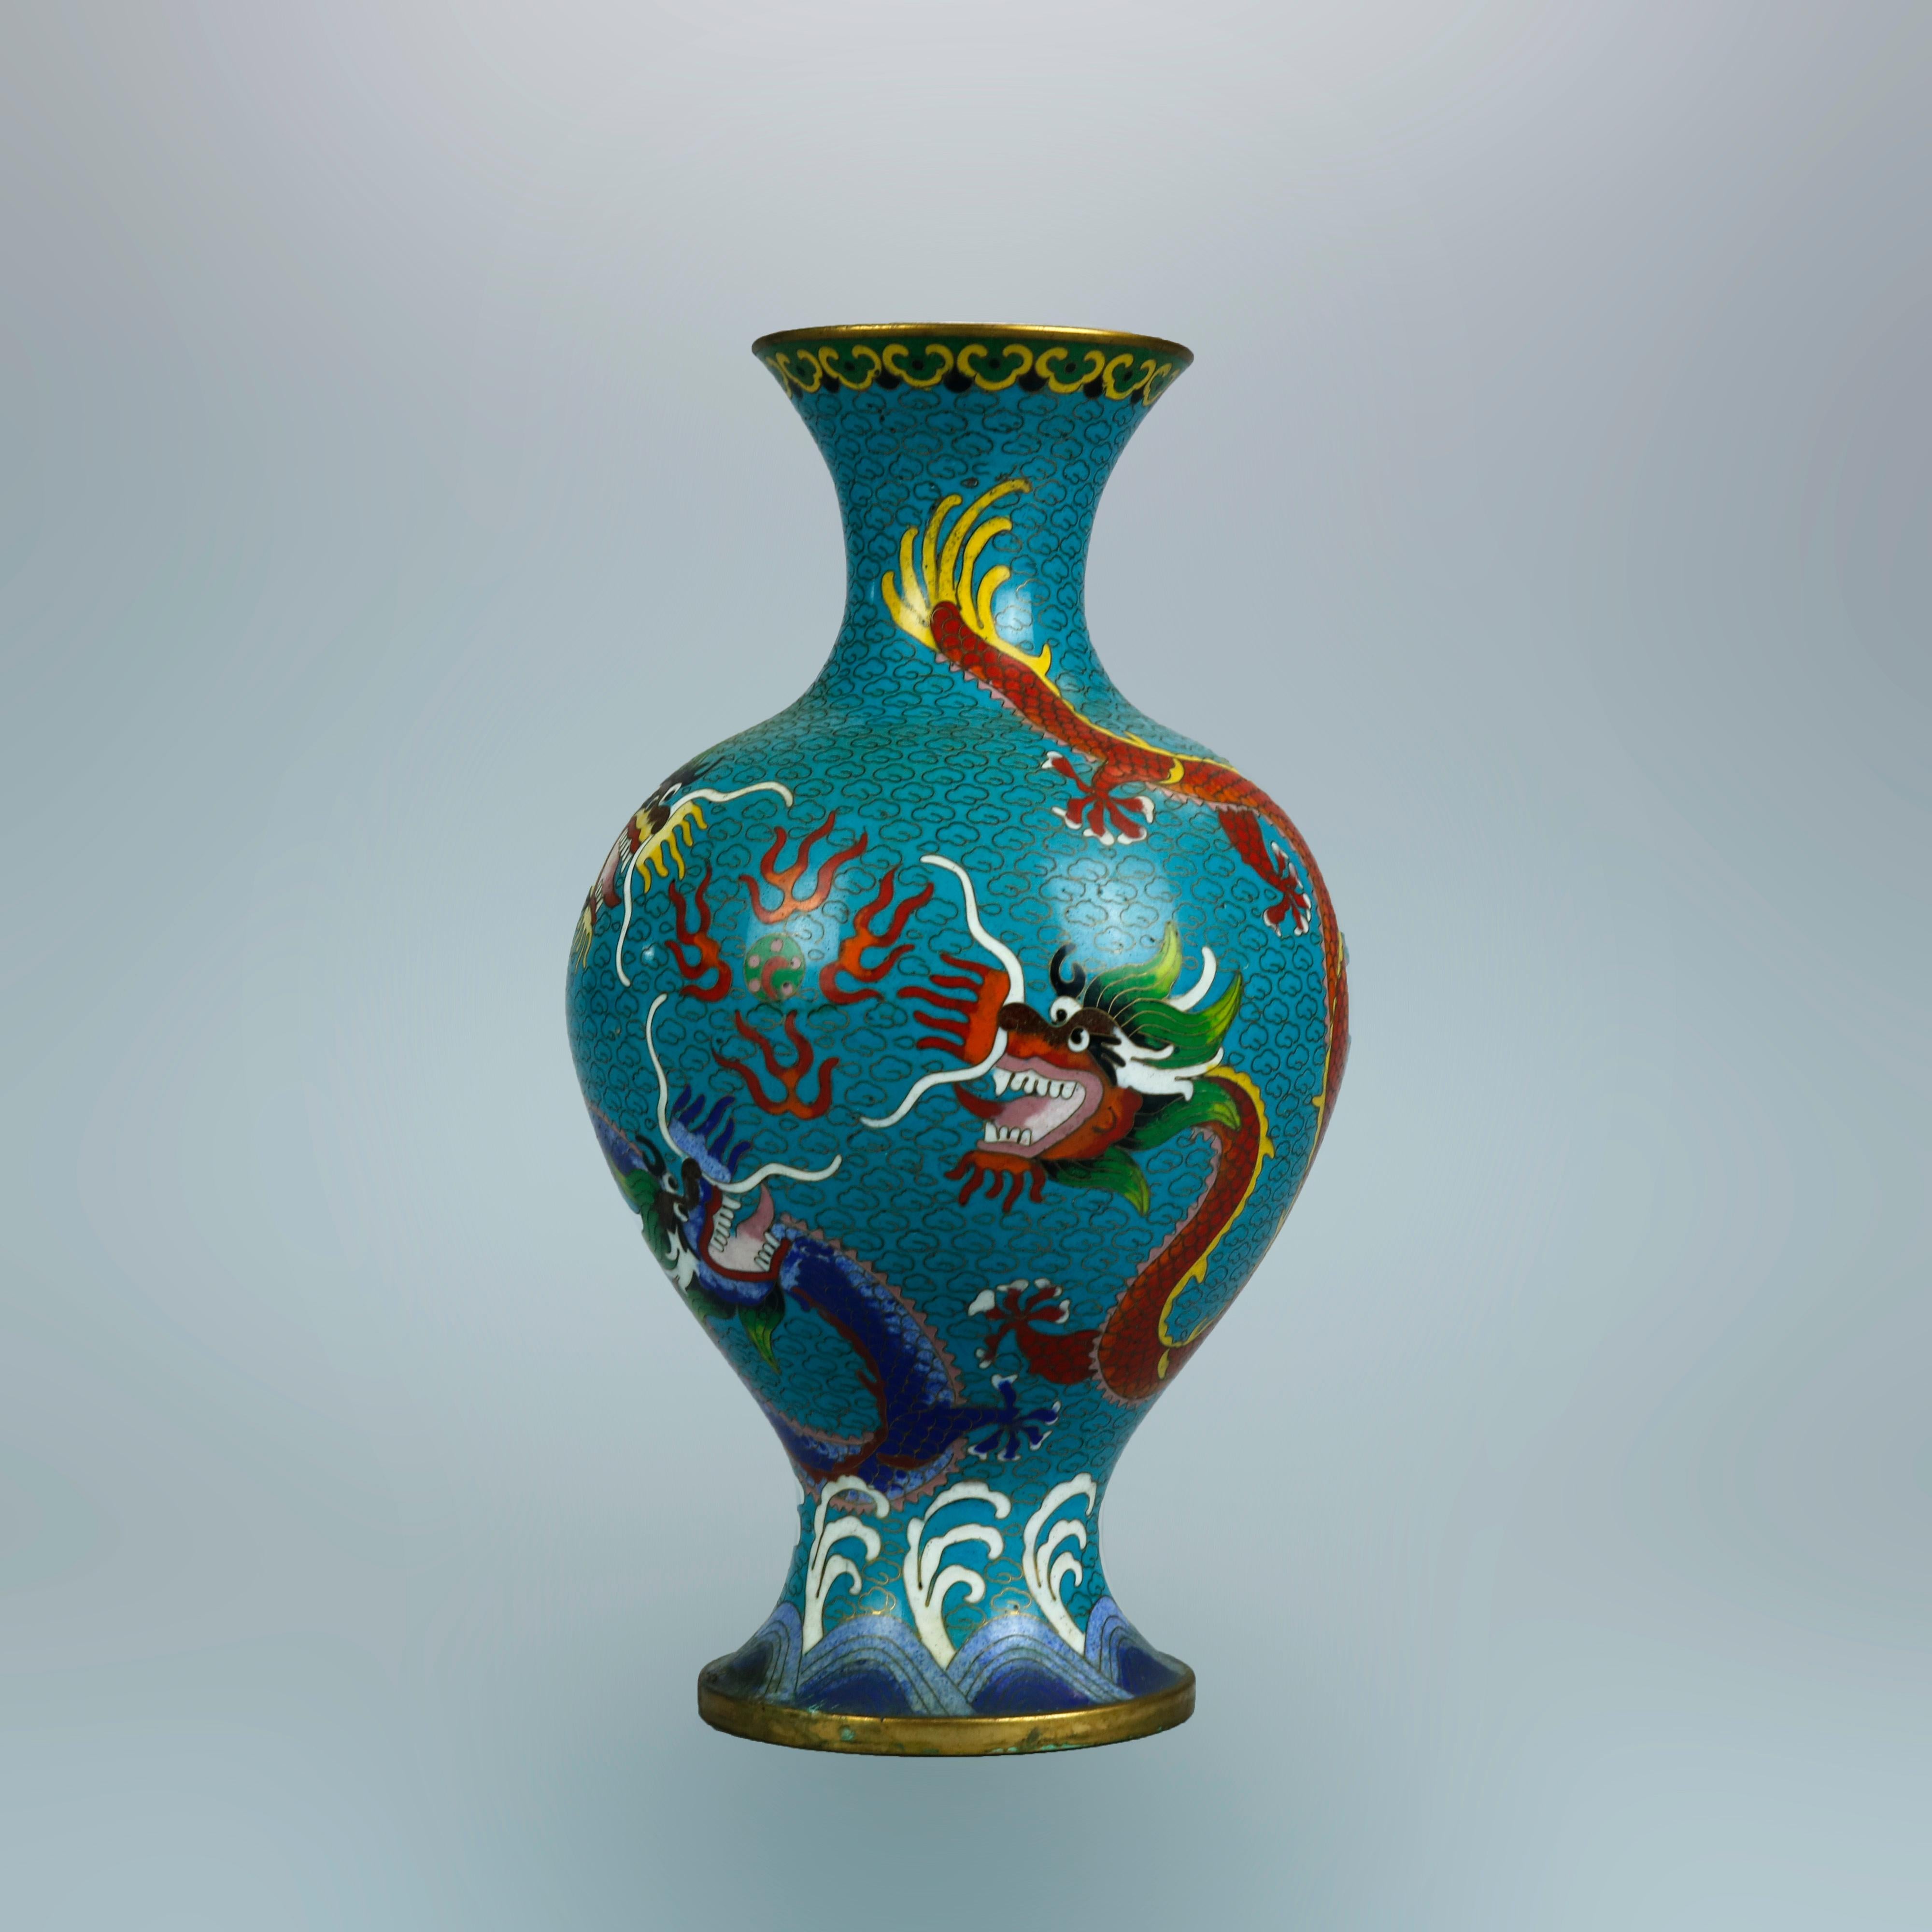 An antique pair of Chinese Meiji vases offer Cloisonne enameled design with dragons, c1900

Measures: 10.25